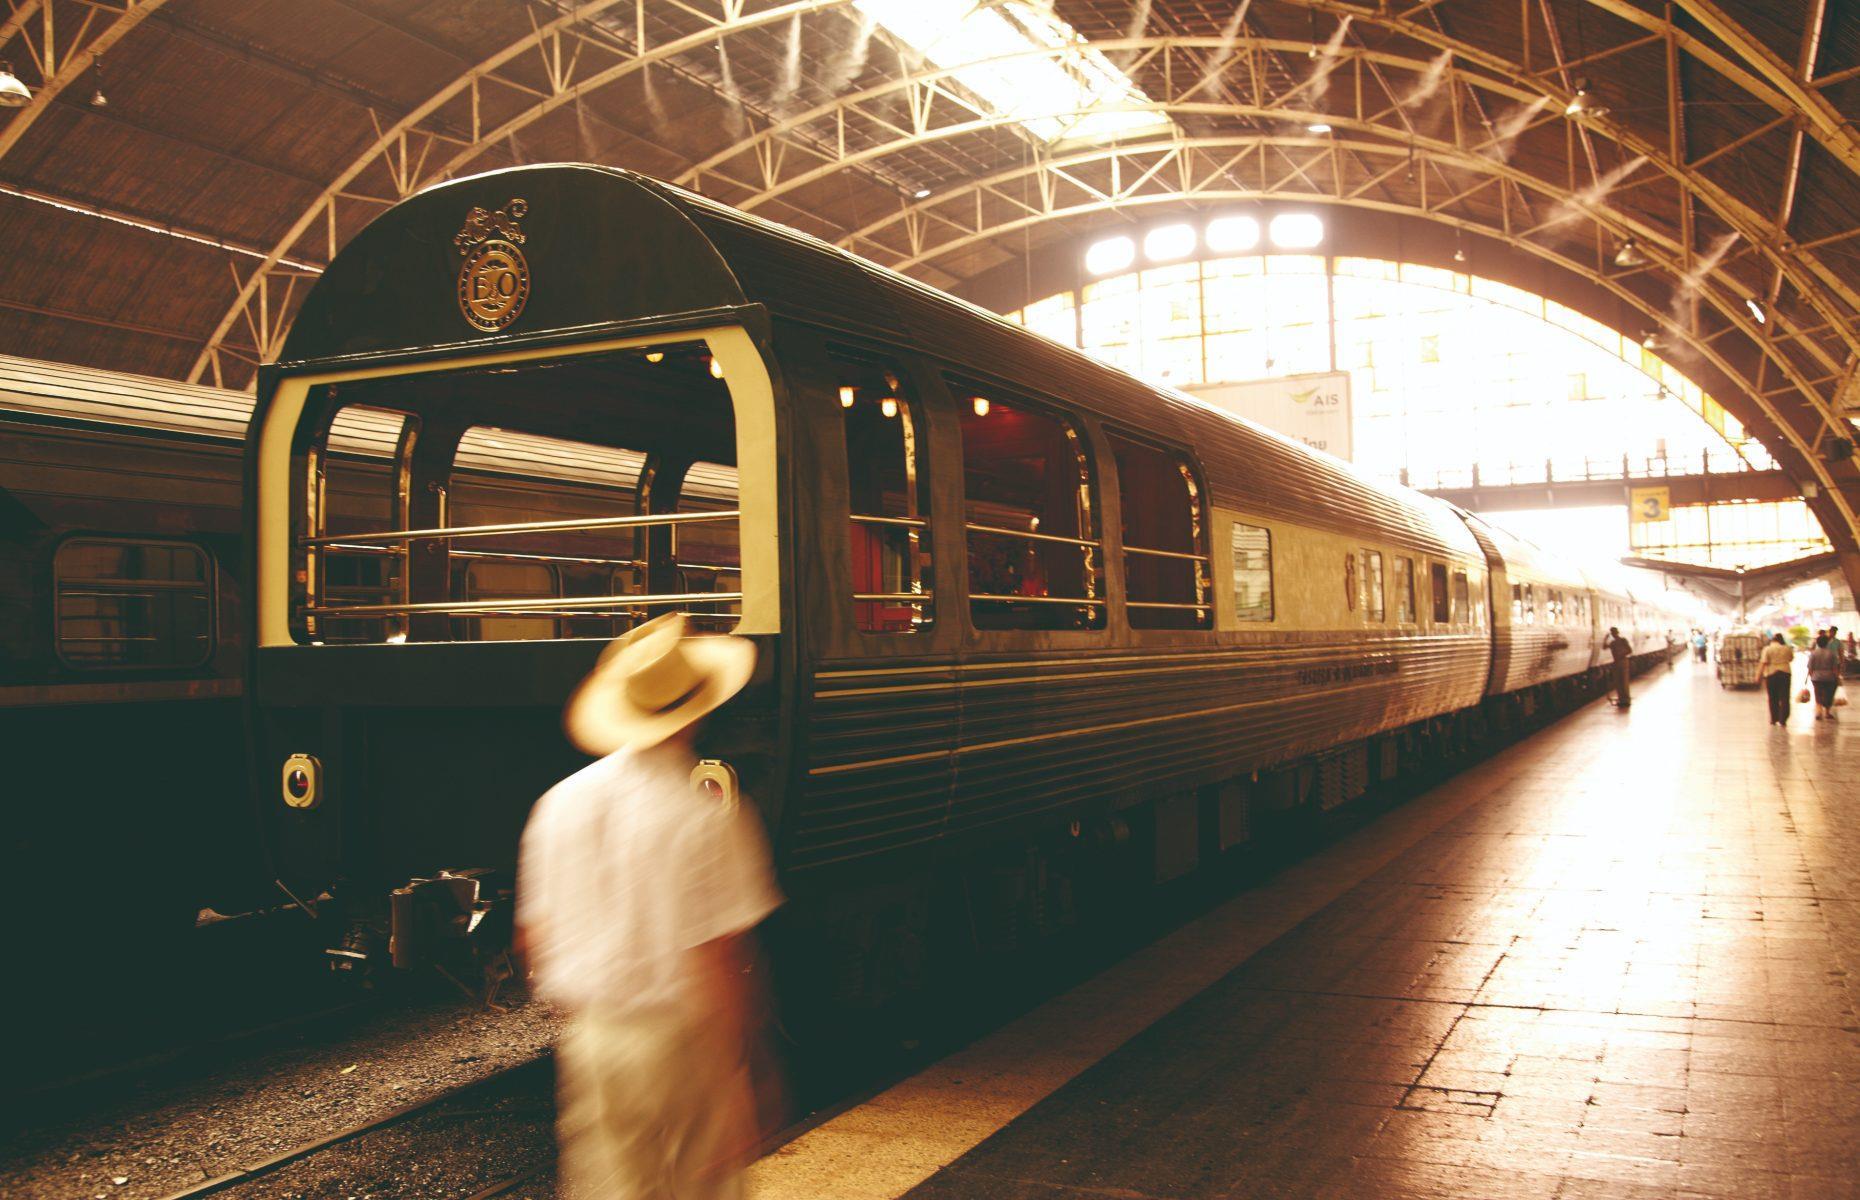 <p>After pausing operations for a few years due to the pandemic, Belmond’s <a href="https://www.belmond.com/trains/asia/eastern-and-oriental-express/">Eastern & Oriental Express</a> will triumphantly return to the tracks of Southeast Asia from February 2024. The sister train of the Venice Simplon-Orient-Express first entered service in 1993, making its inaugural journey between Bangkok and Singapore. Now, Belmond is launching two new seasonal round-trip itineraries that will depart from Singapore’s Woodlands station and wind through the landscapes of Malaysia.</p>